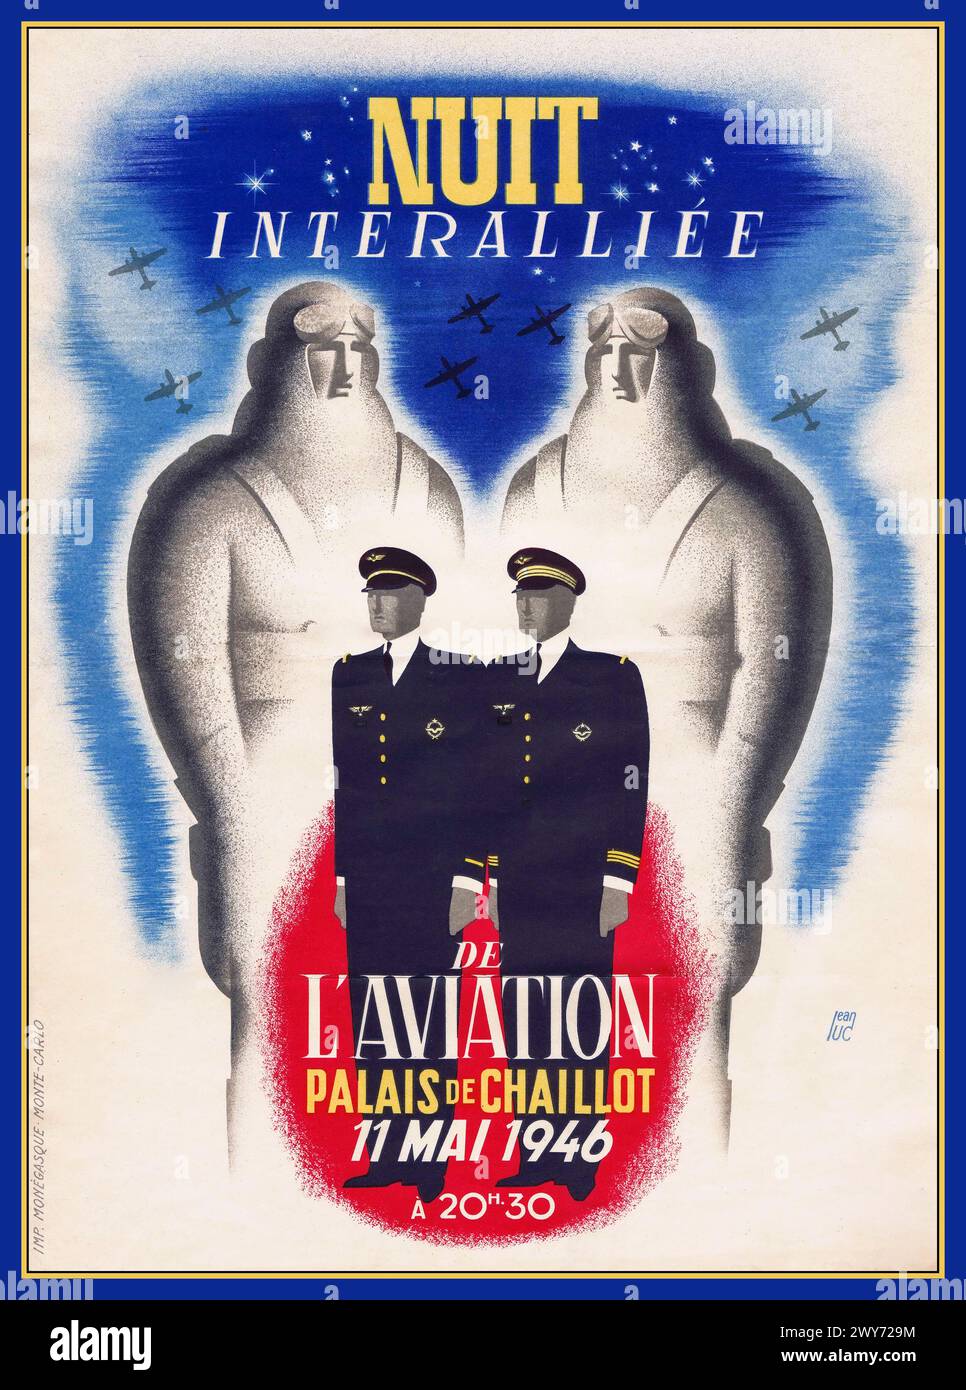 'NUIT interallee de Aviation War French aviation poster 1946. ''A night of Allied Aircraft' Event celebrating the aviators of the Allied forces, by artist Jean Luc. 'NUIT interallee de Aviation, Palais de Chaillot 11 May 1946 Paris France. Post World War II After the Second World War Stock Photo